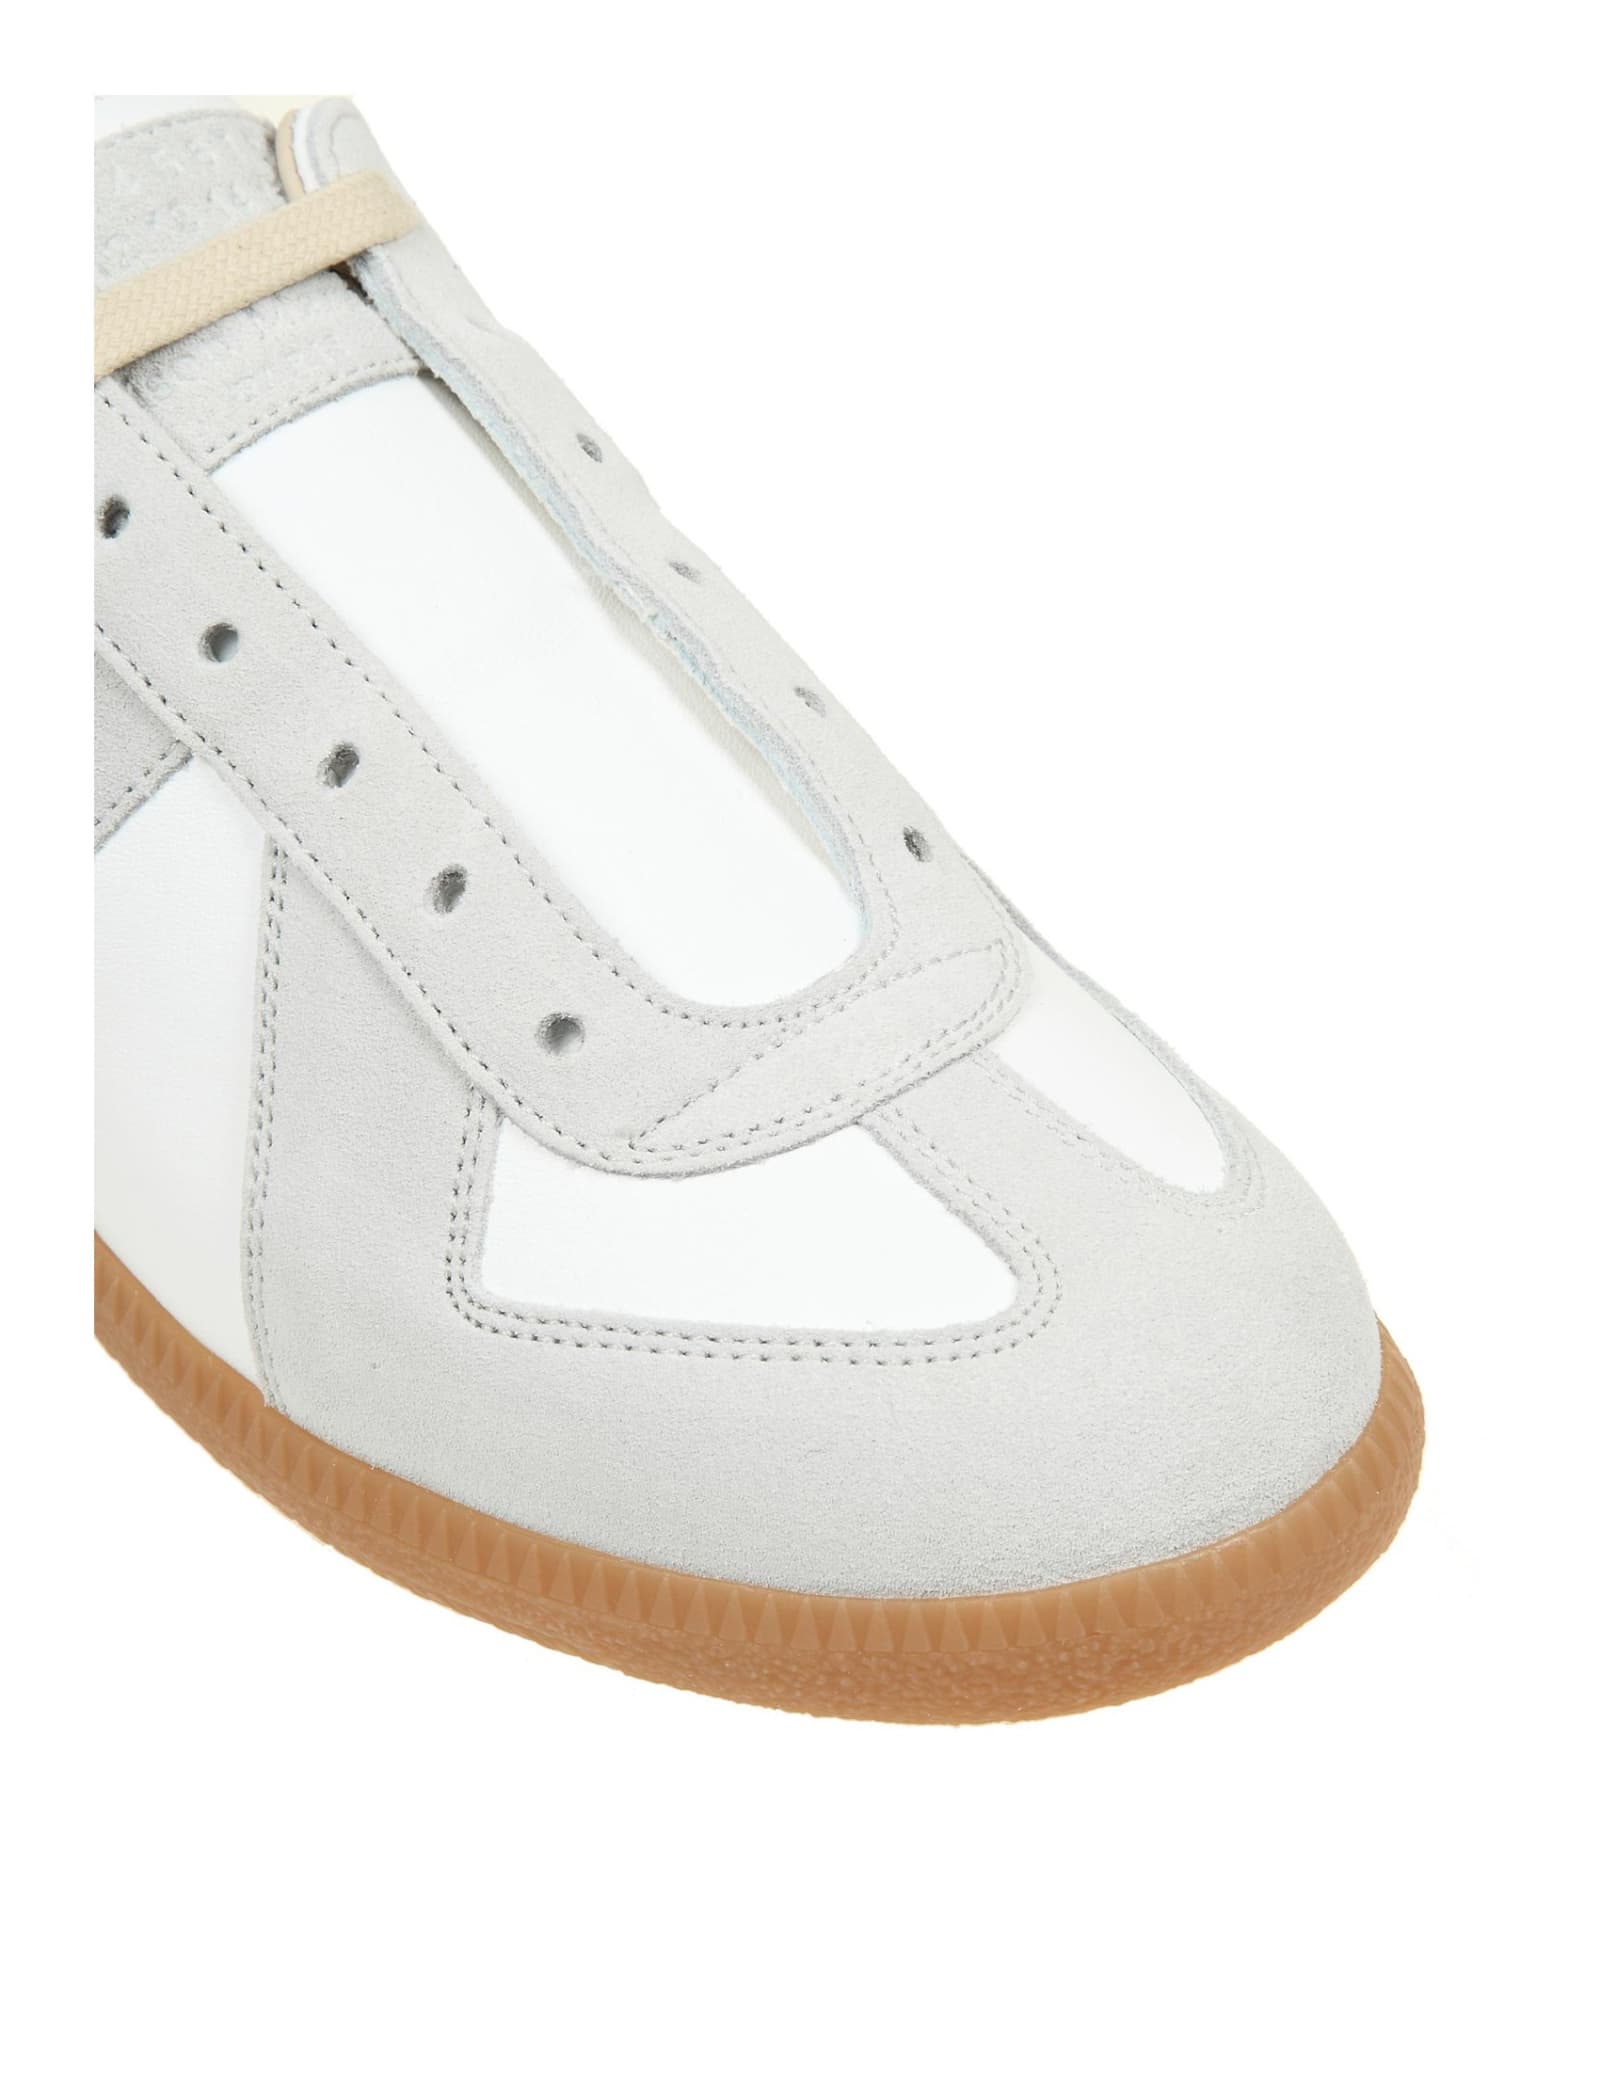 Shop Maison Margiela Sneakers Replica In Leather And Suede In White